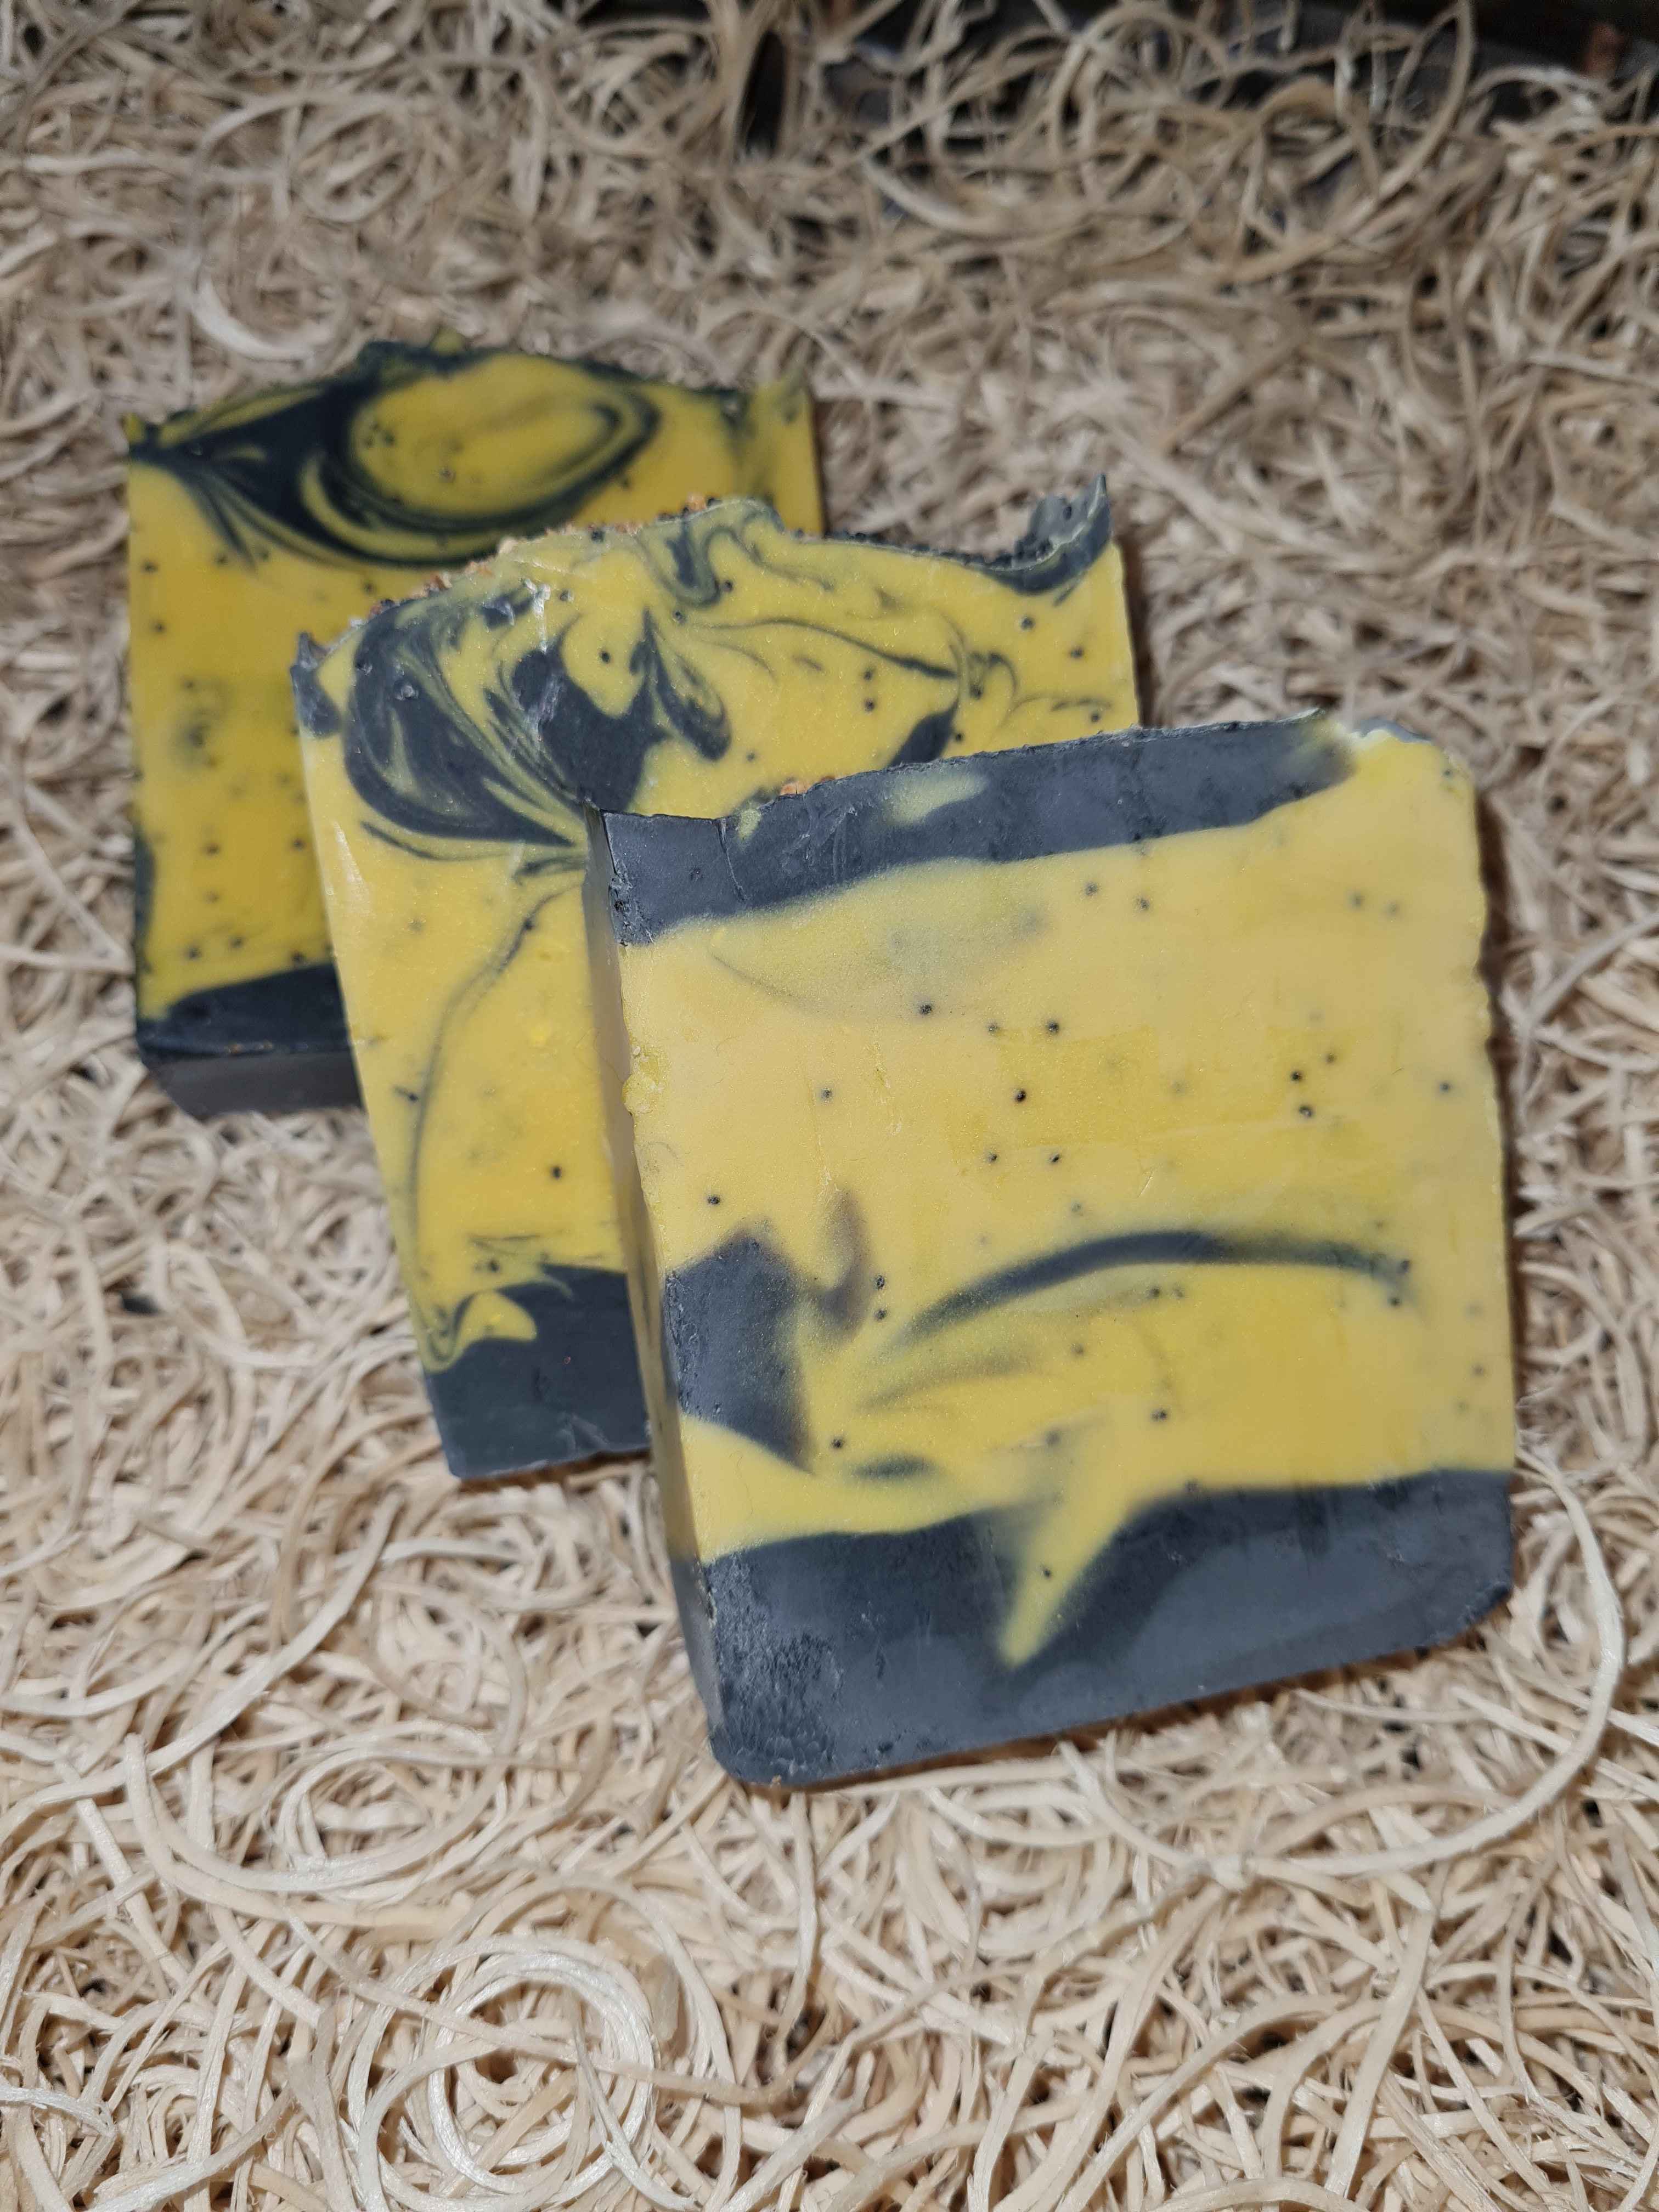 Goat's milk soap with Lemon essential oil, activated charcoal, Beeswax and poppy seeds 